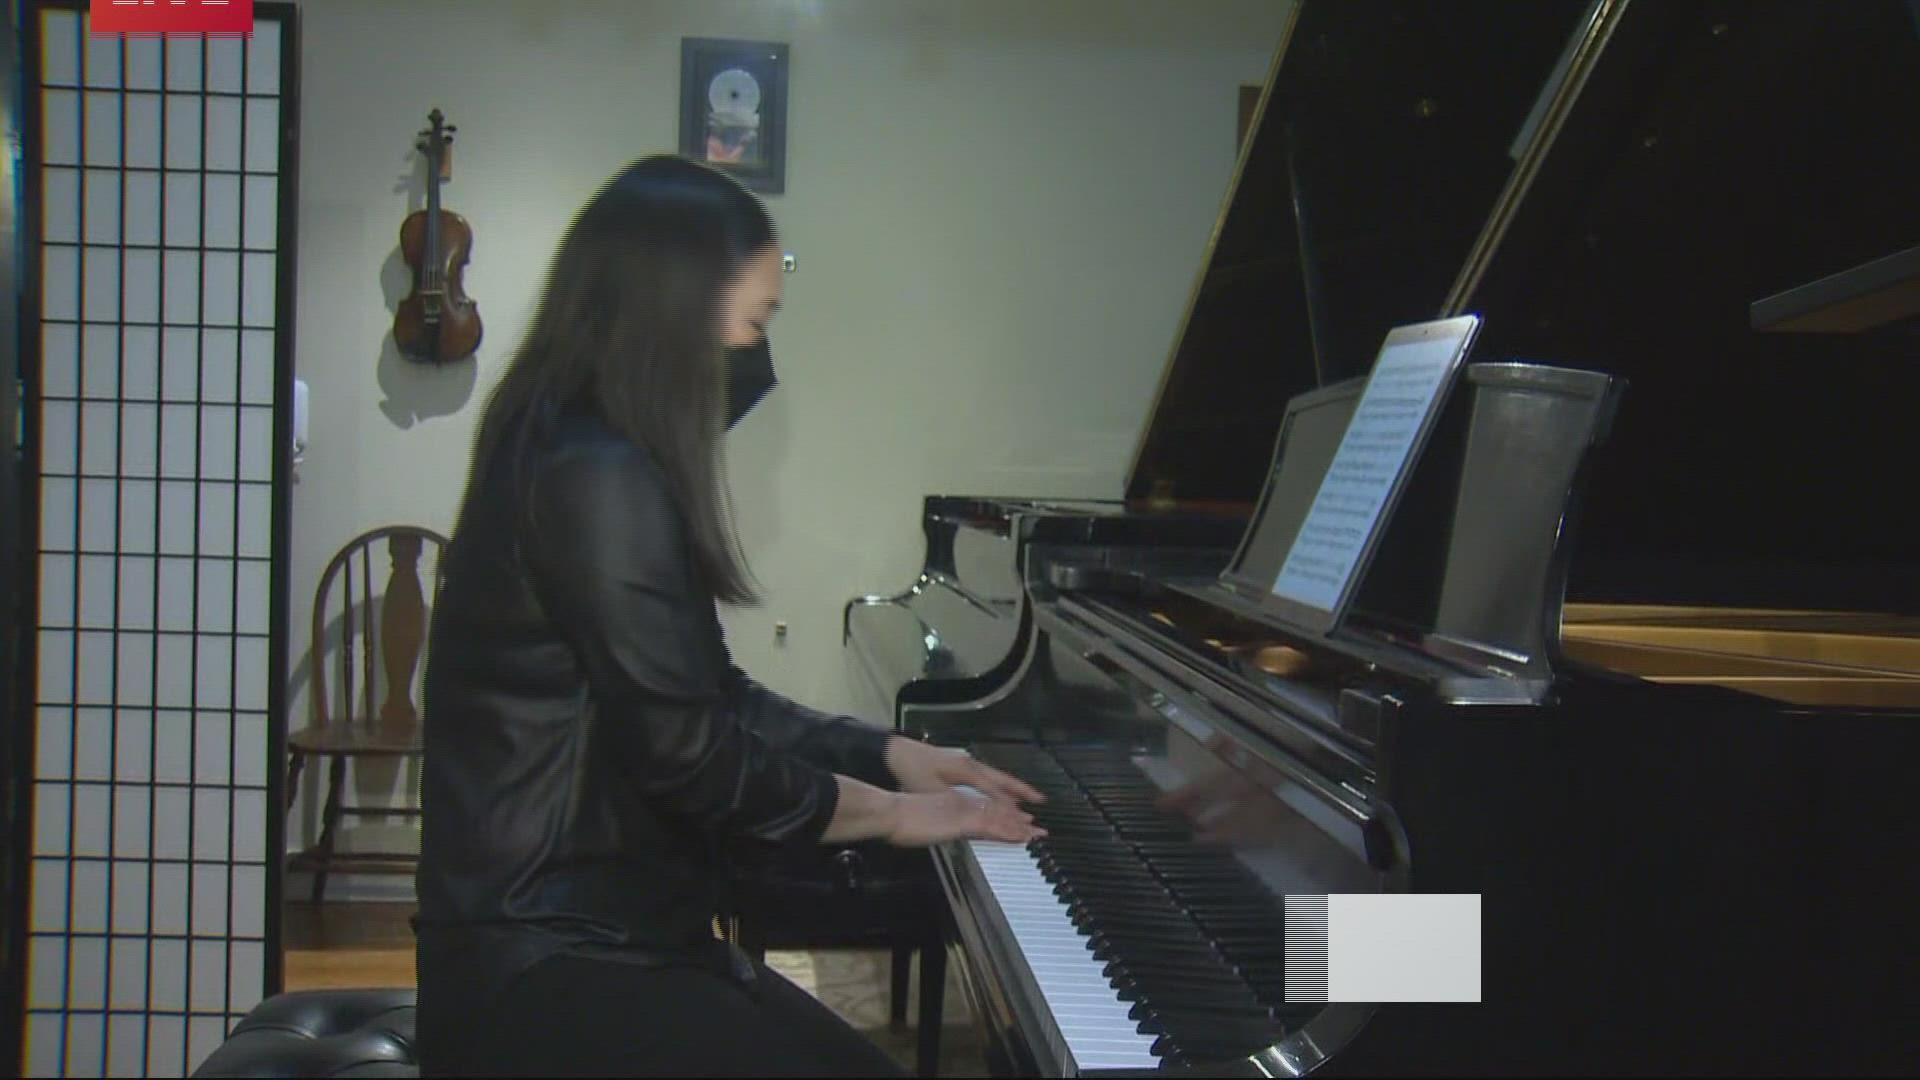 The Fear No Music project promotes music education by exposing audiences to new music from young composers. Two pianists from the group joined KGW Sunrise on Monday.